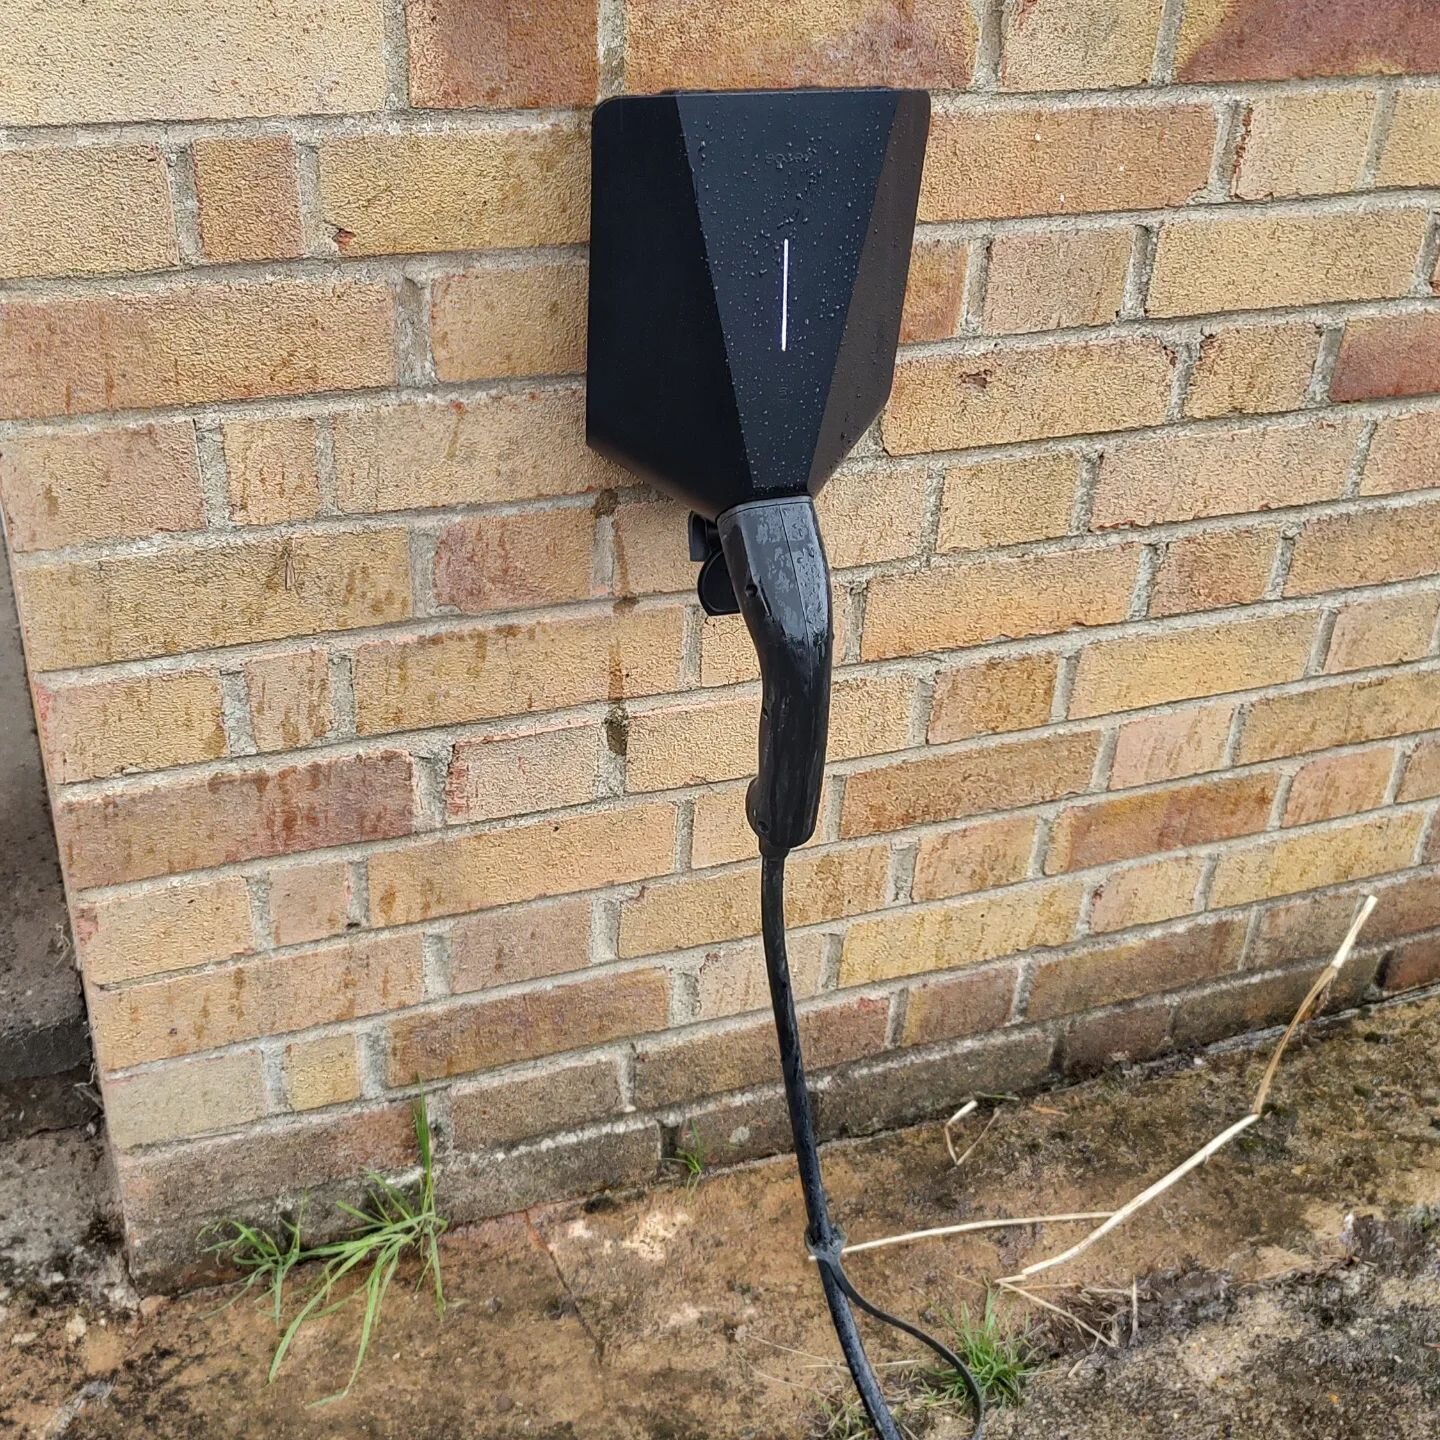 Today's install was a @easee_uk charger. Great unit to install. #evcharger #evnorthampton #evchargermidlands #evchargernorthampton #electricvehicle #electricvehiclenorthamptonshire